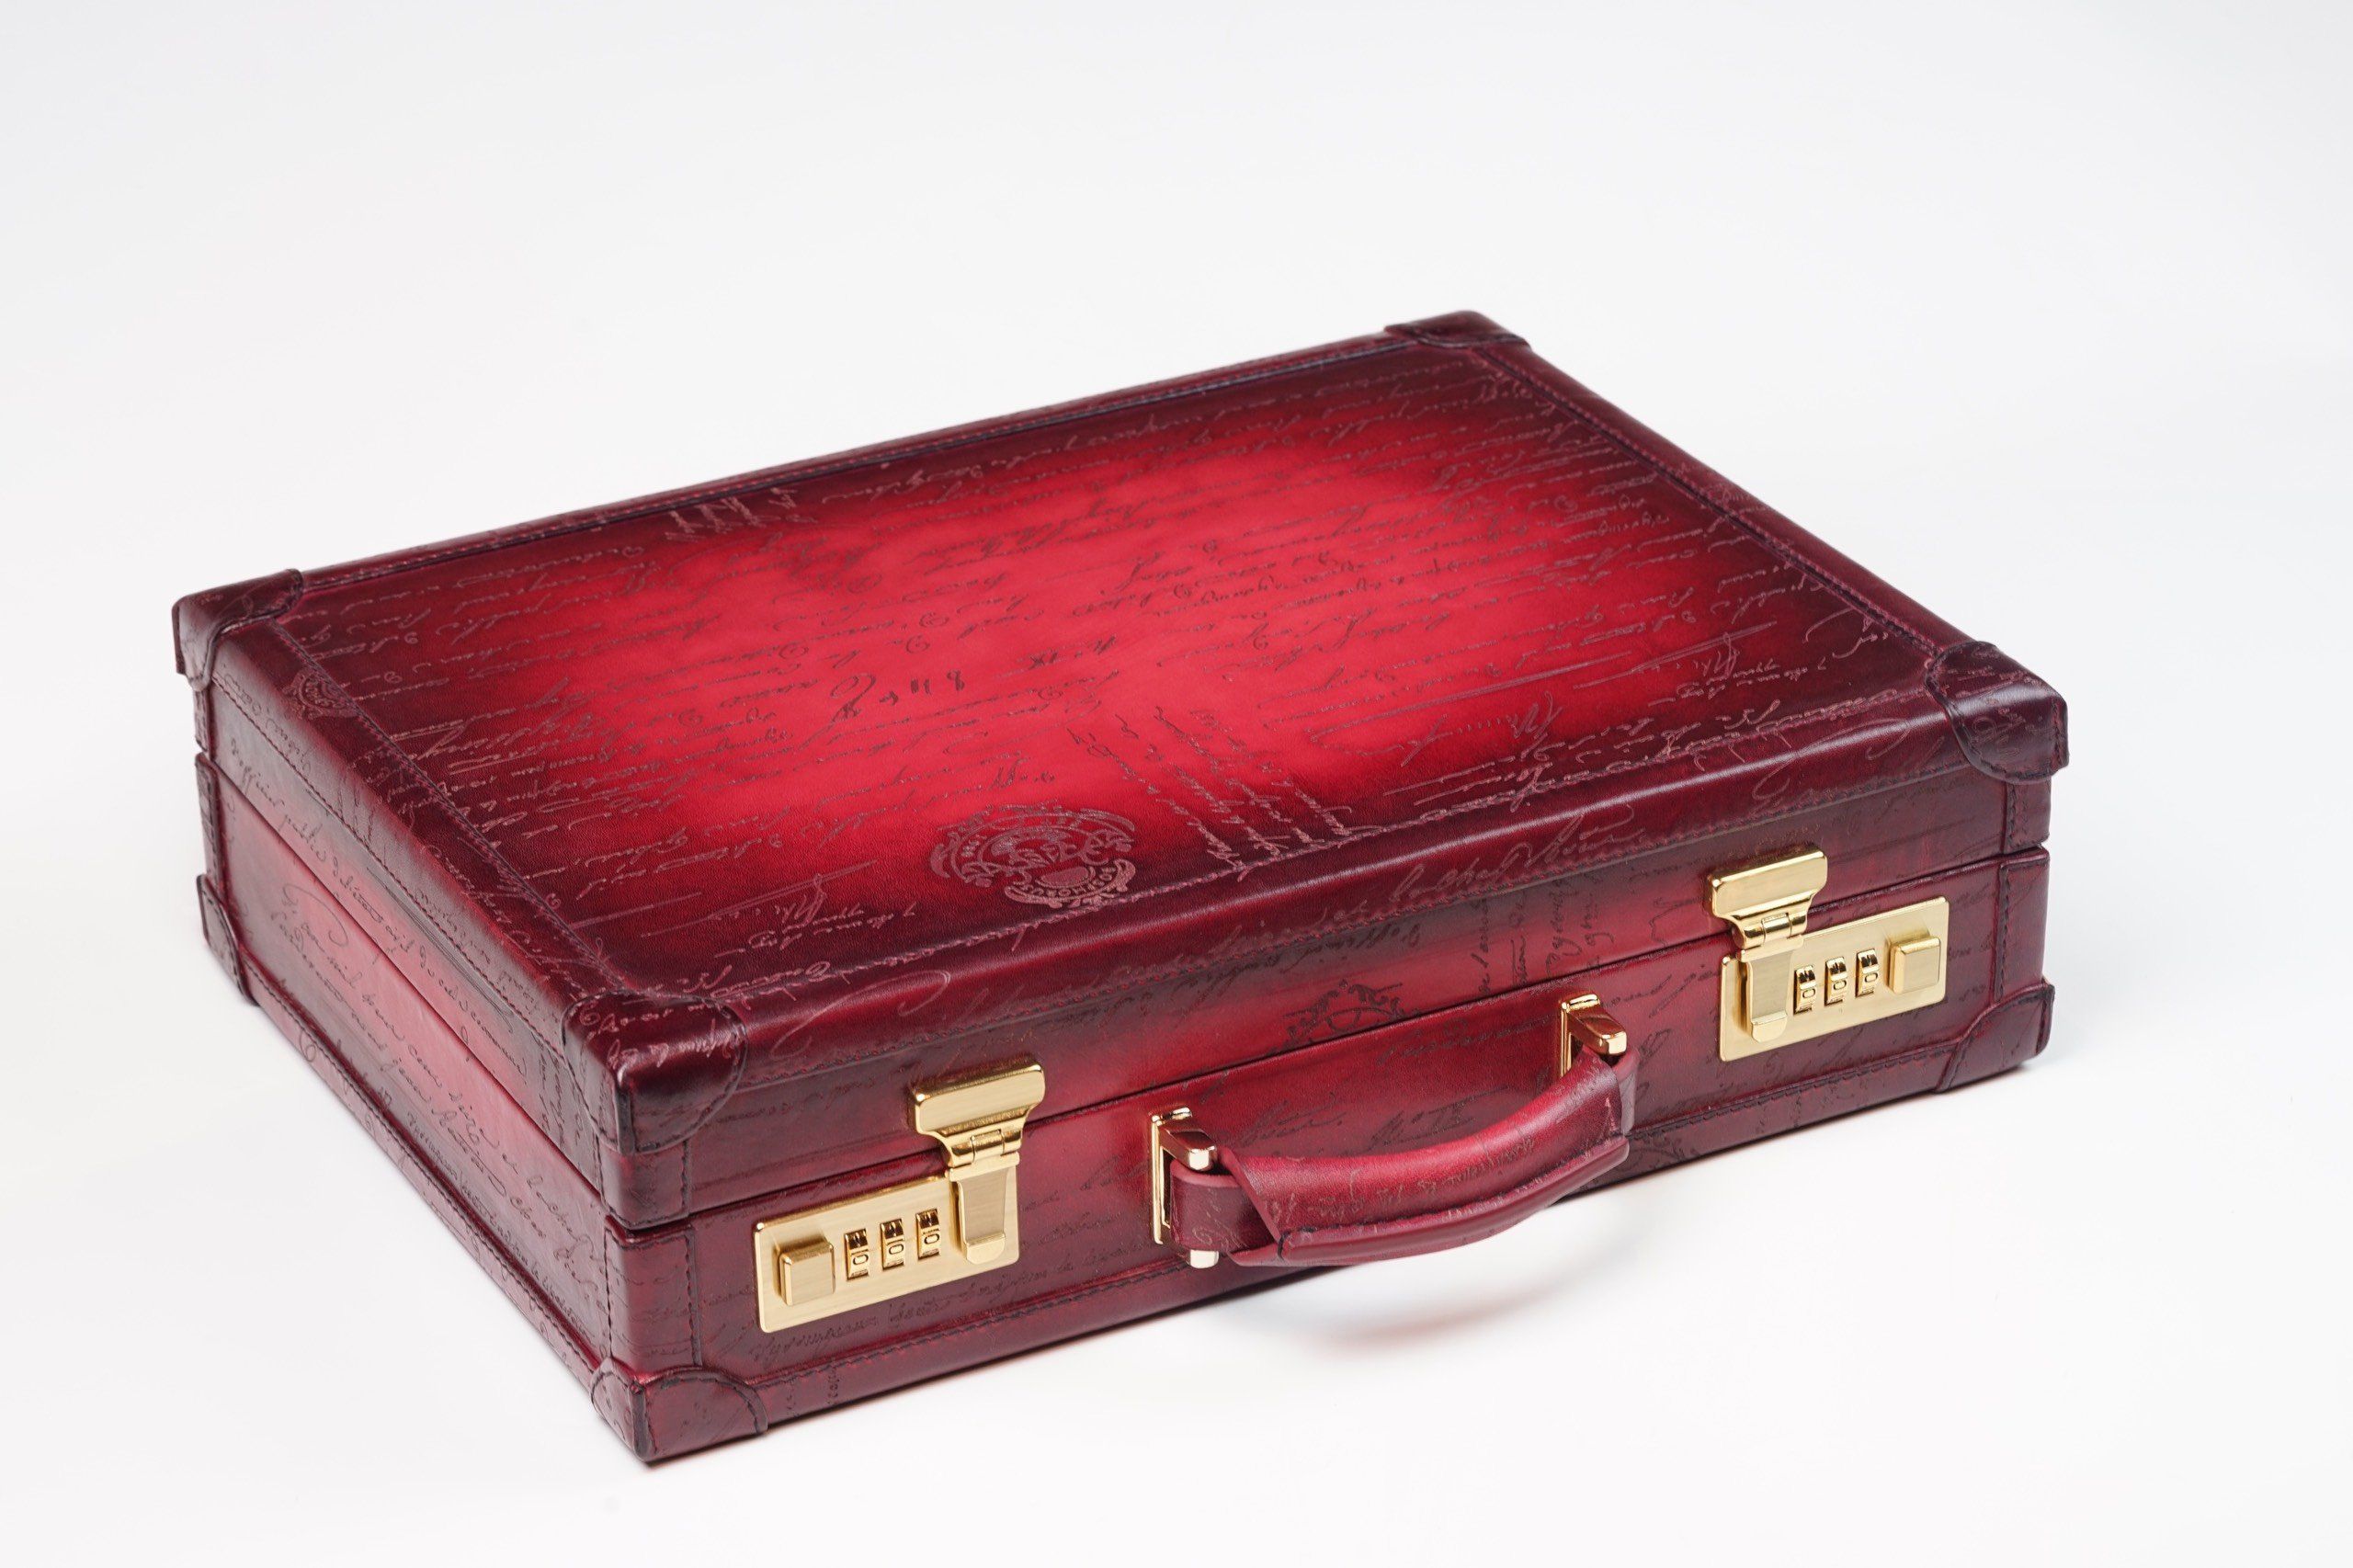 WATCH COLLECTOR CASE COMBINATION LOCK - MASTER EDITION PARCHMENT PATINA RED For 10 Watches